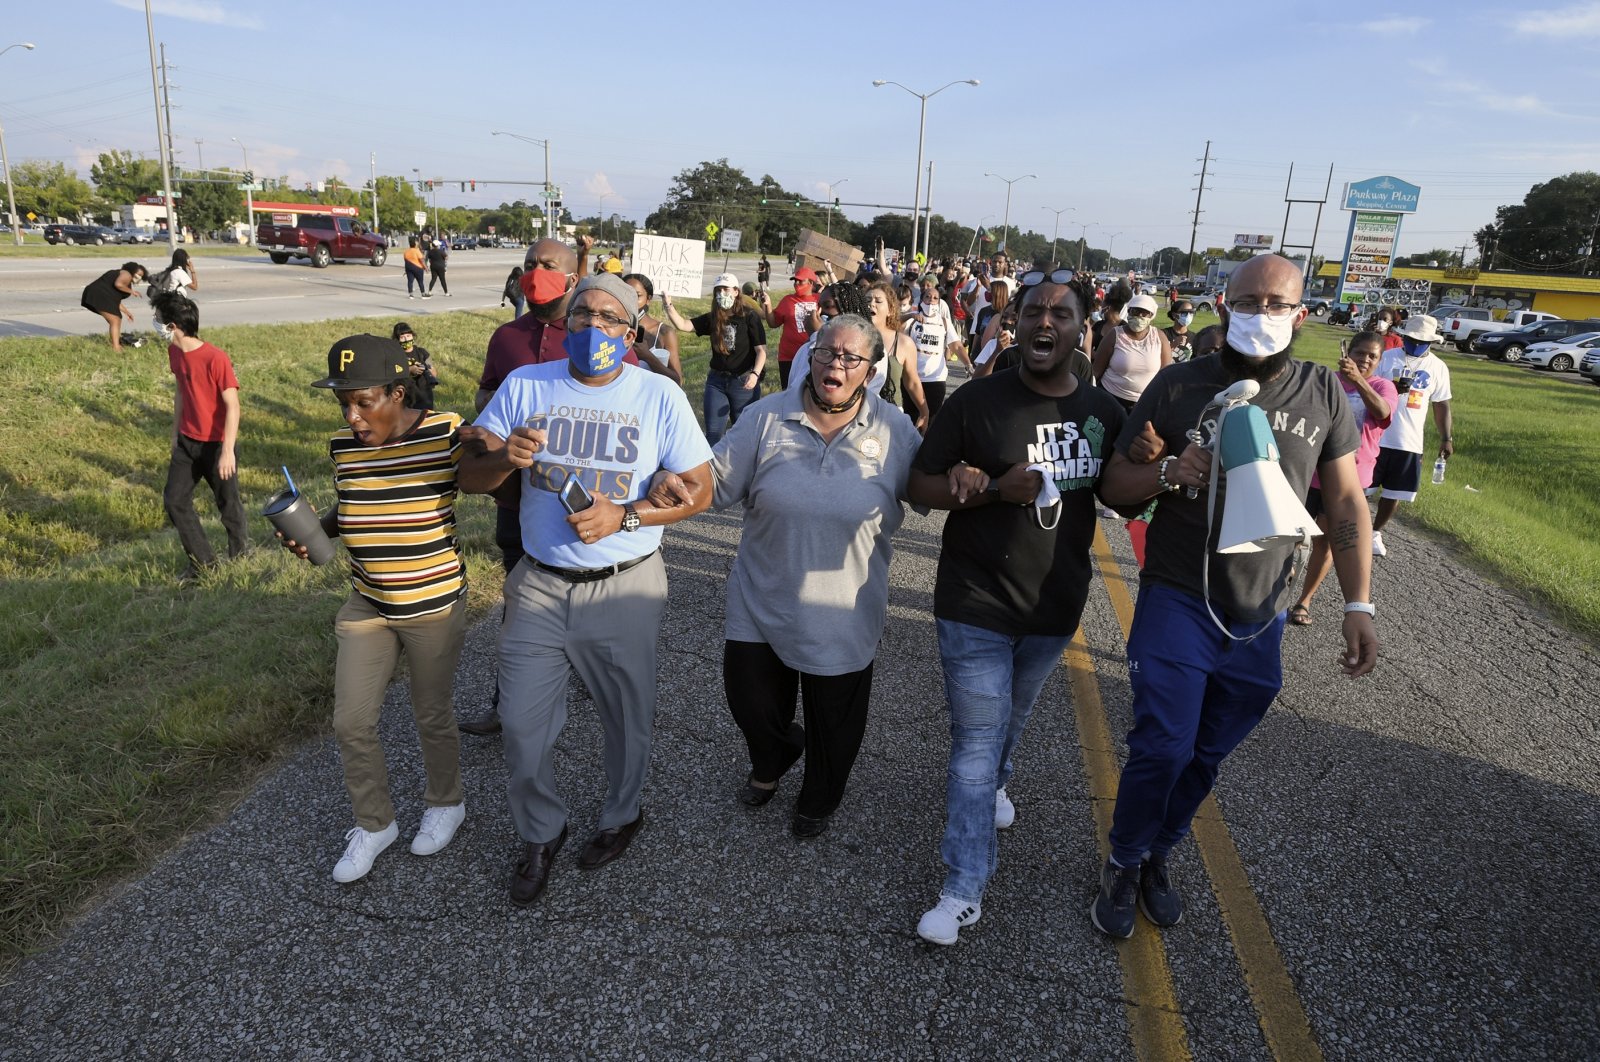 Marja Broussard, center, president of the Lafayette chapter of the NAACP, walks down Evangline Thruway with others demanding justice for Trayford Pellerin, Saturday, Aug. 22, 2020, in Lafayette, La. Pellerin was shot and killed by Lafayette police officers while armed with a knife the night before. (AP Photo)